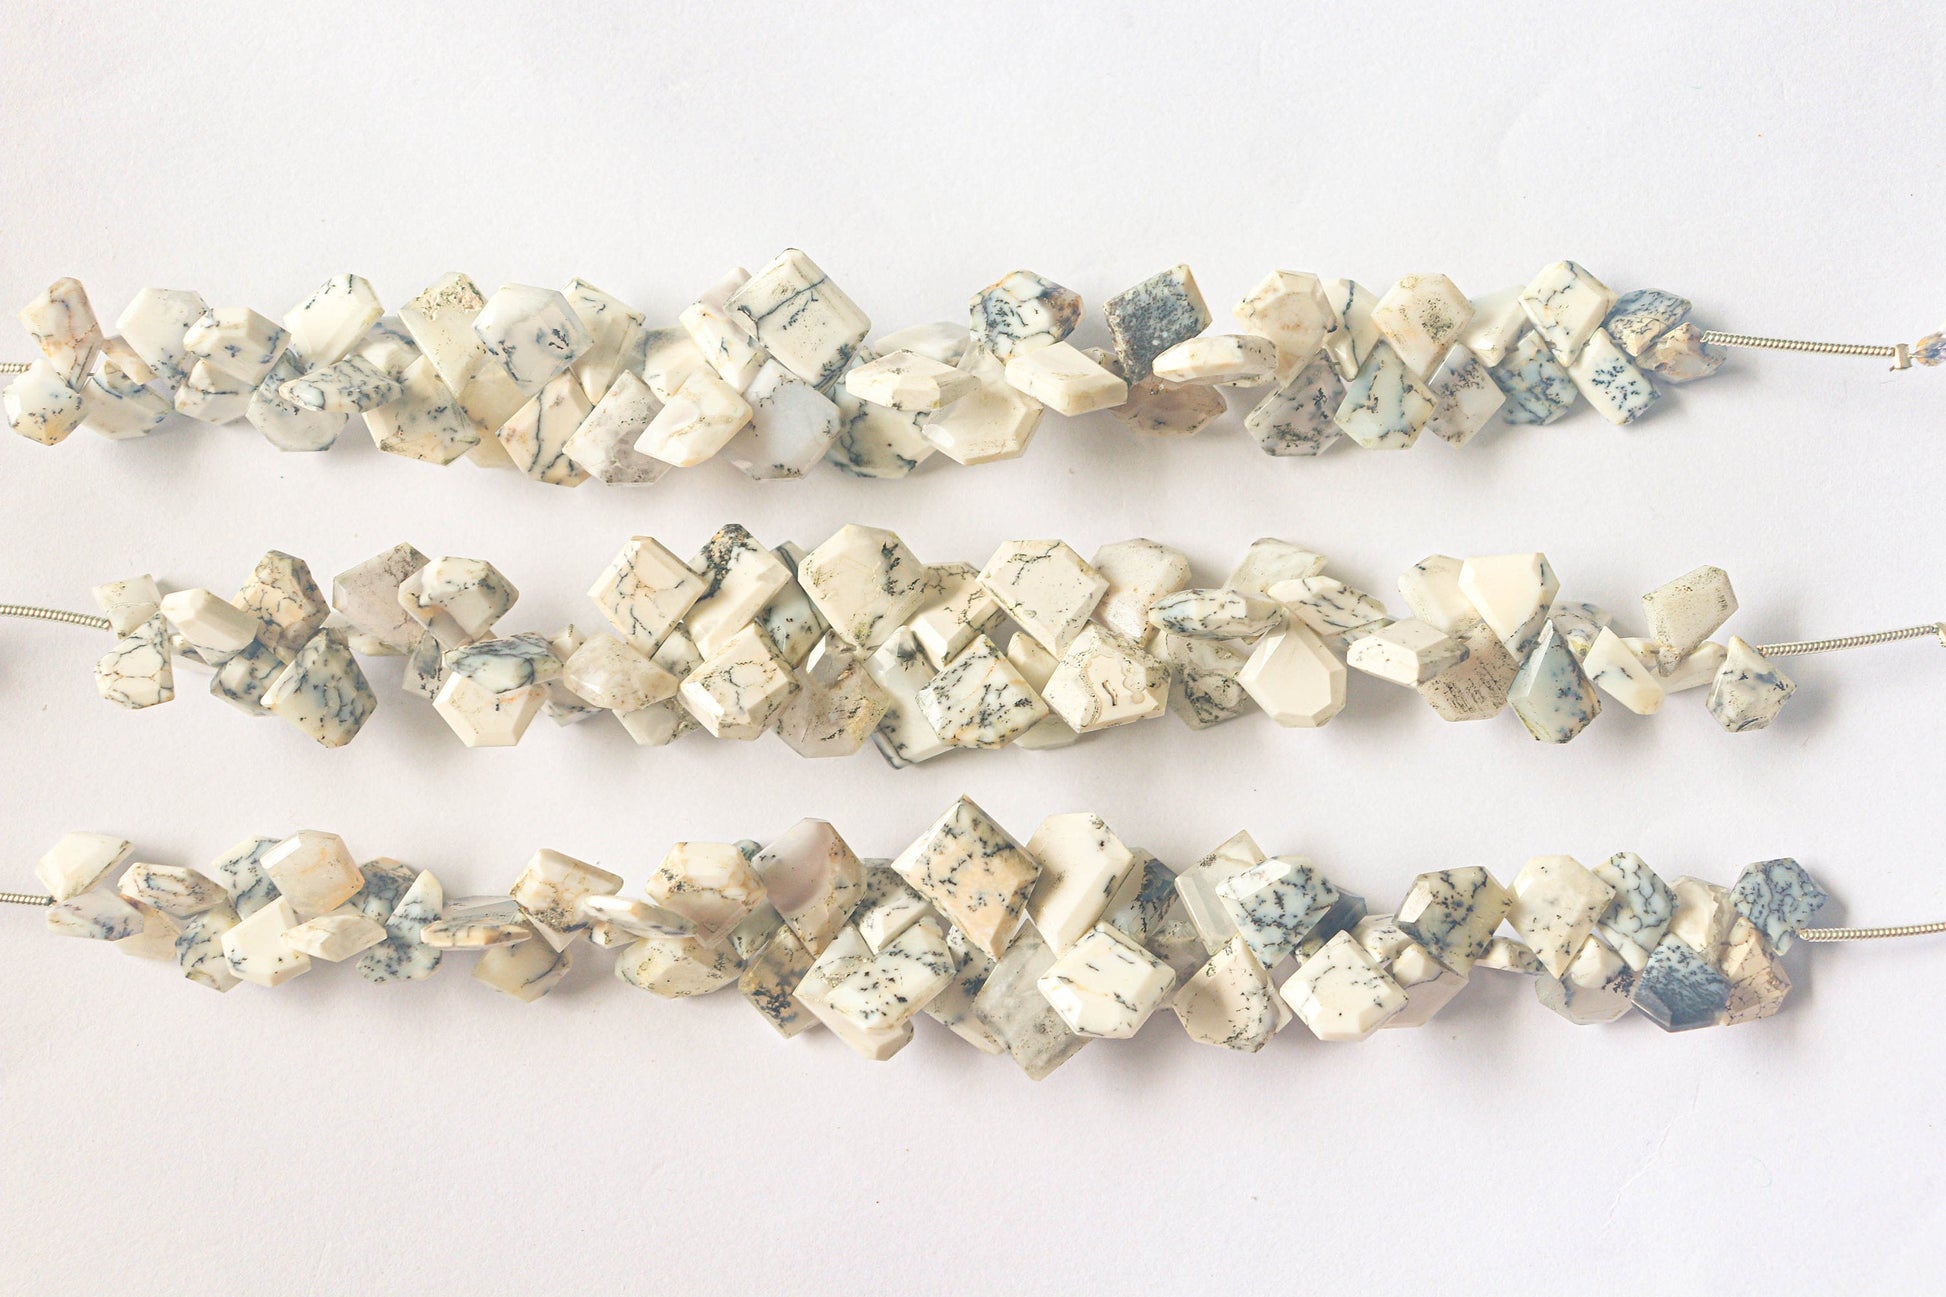 Dendrite Opal Fancy Shape Beads | 7x8mm - 13x15mm | 48 Pieces | 6 Inch String | Natural Gemstone Beads | Beadsforyourjewellery Beadsforyourjewelry